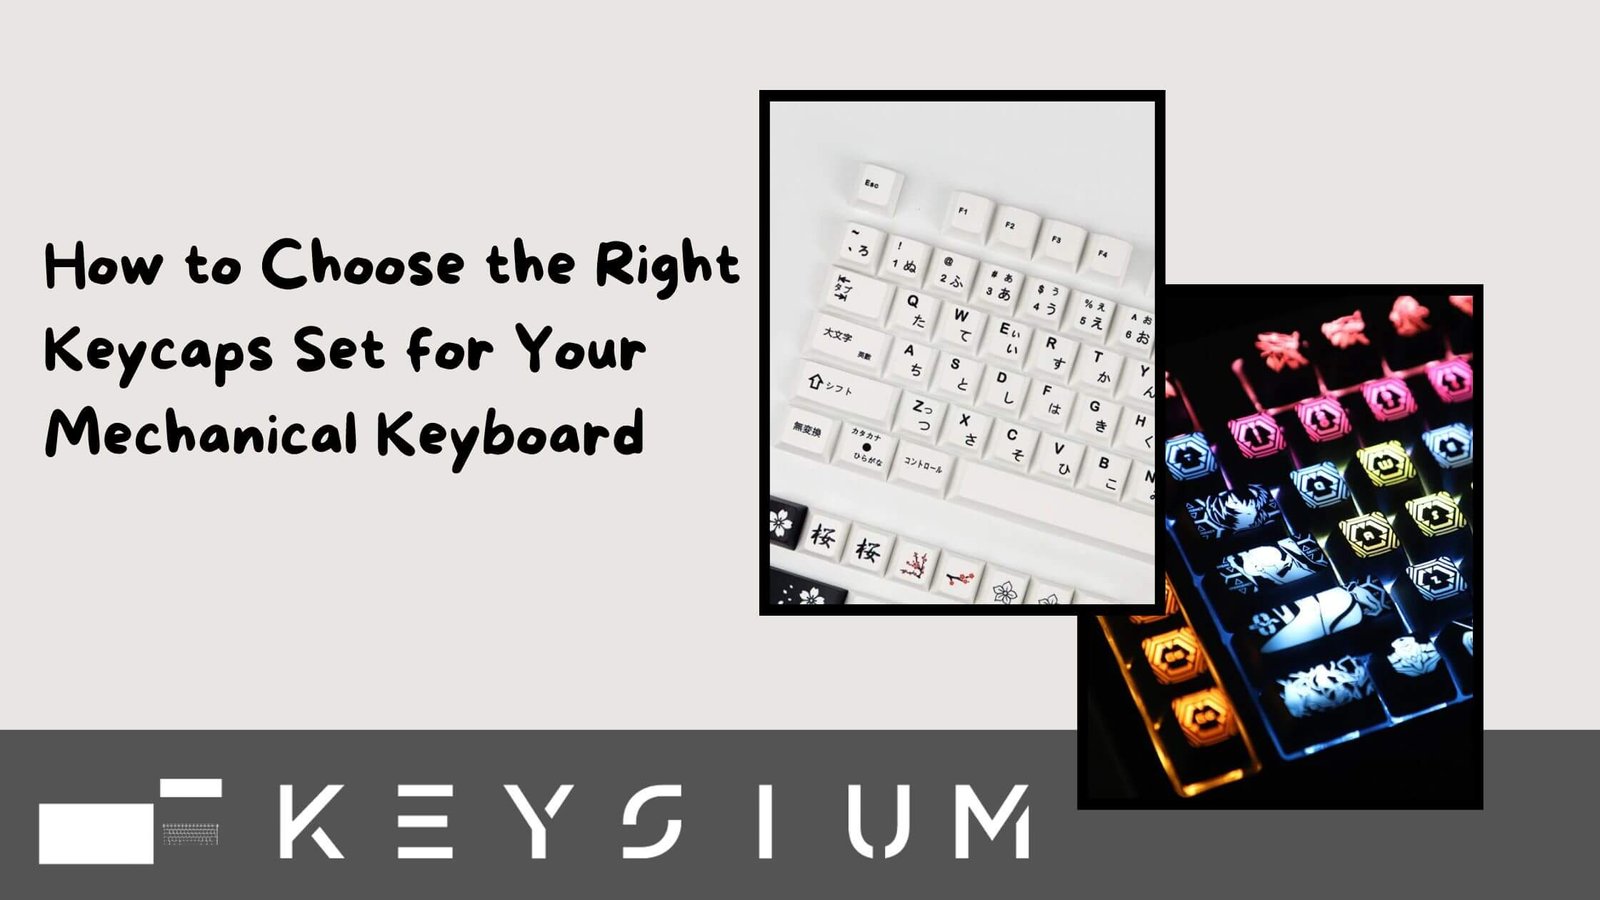 How to Choose the Right Keycaps Set for Your Mechanical Keyboard